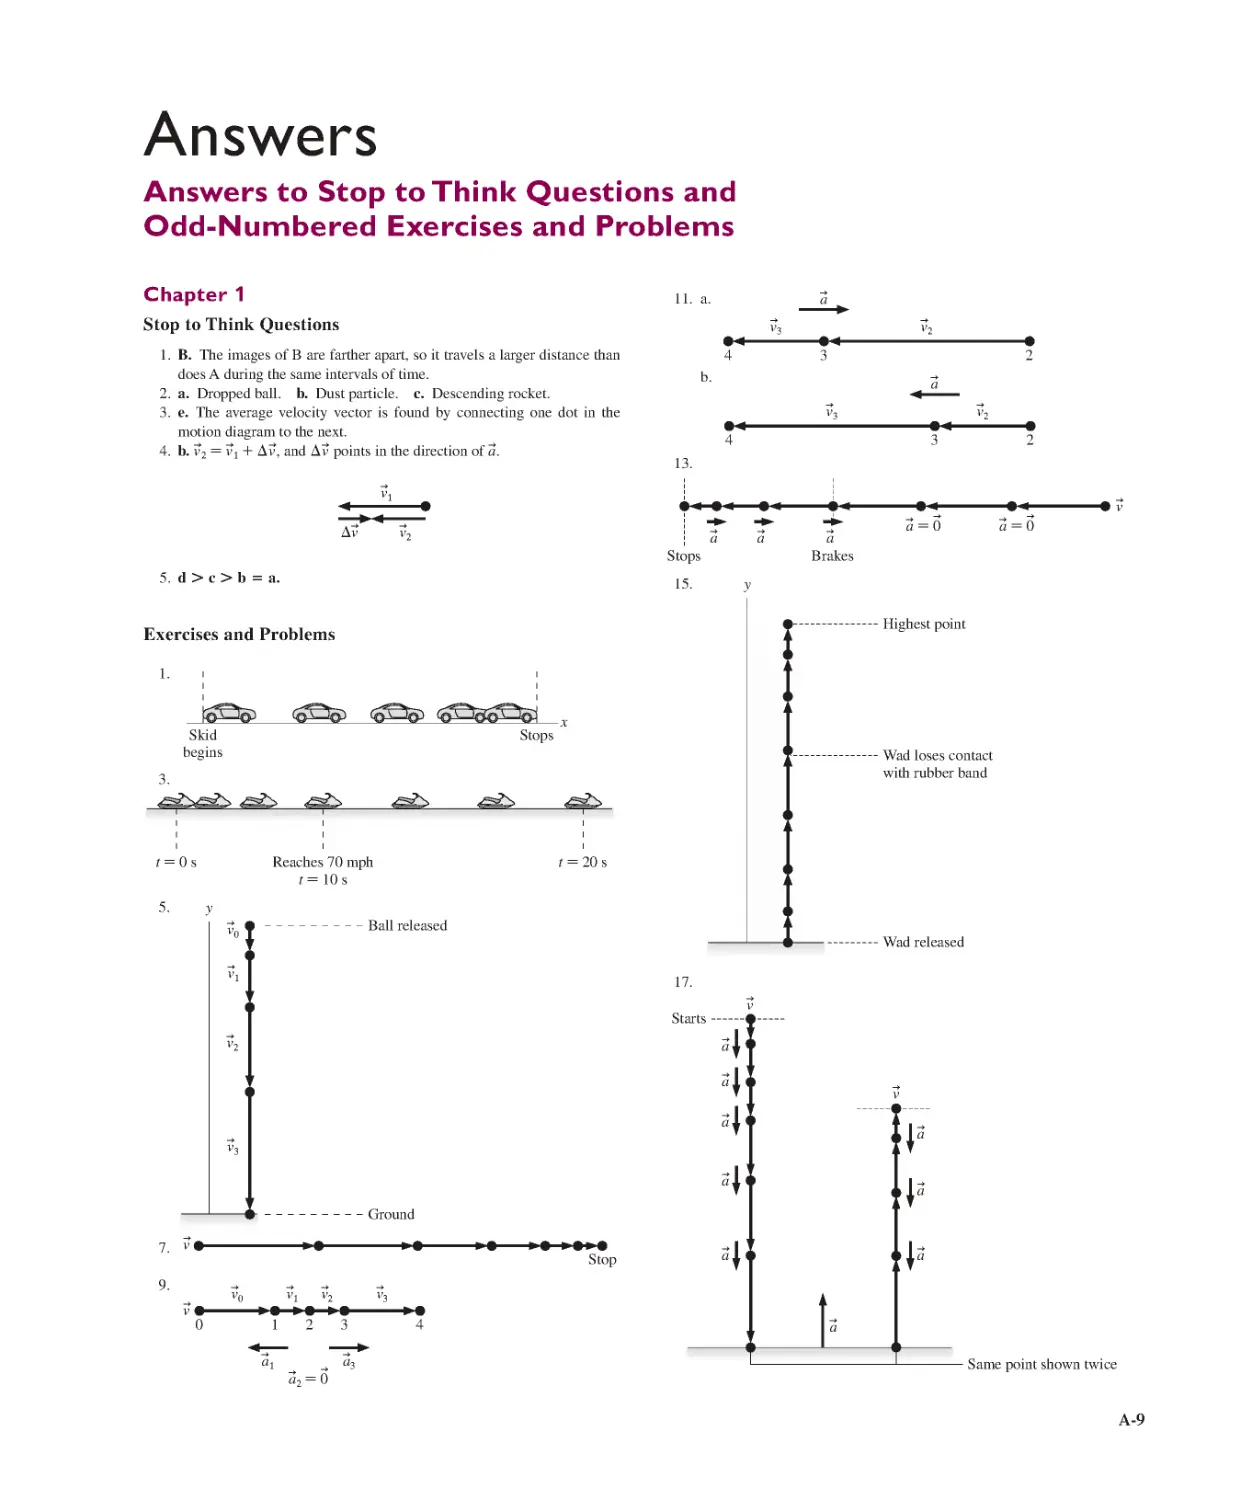 Answers to Stop to Think Questions and Odd-Numbered Exercises and Problems